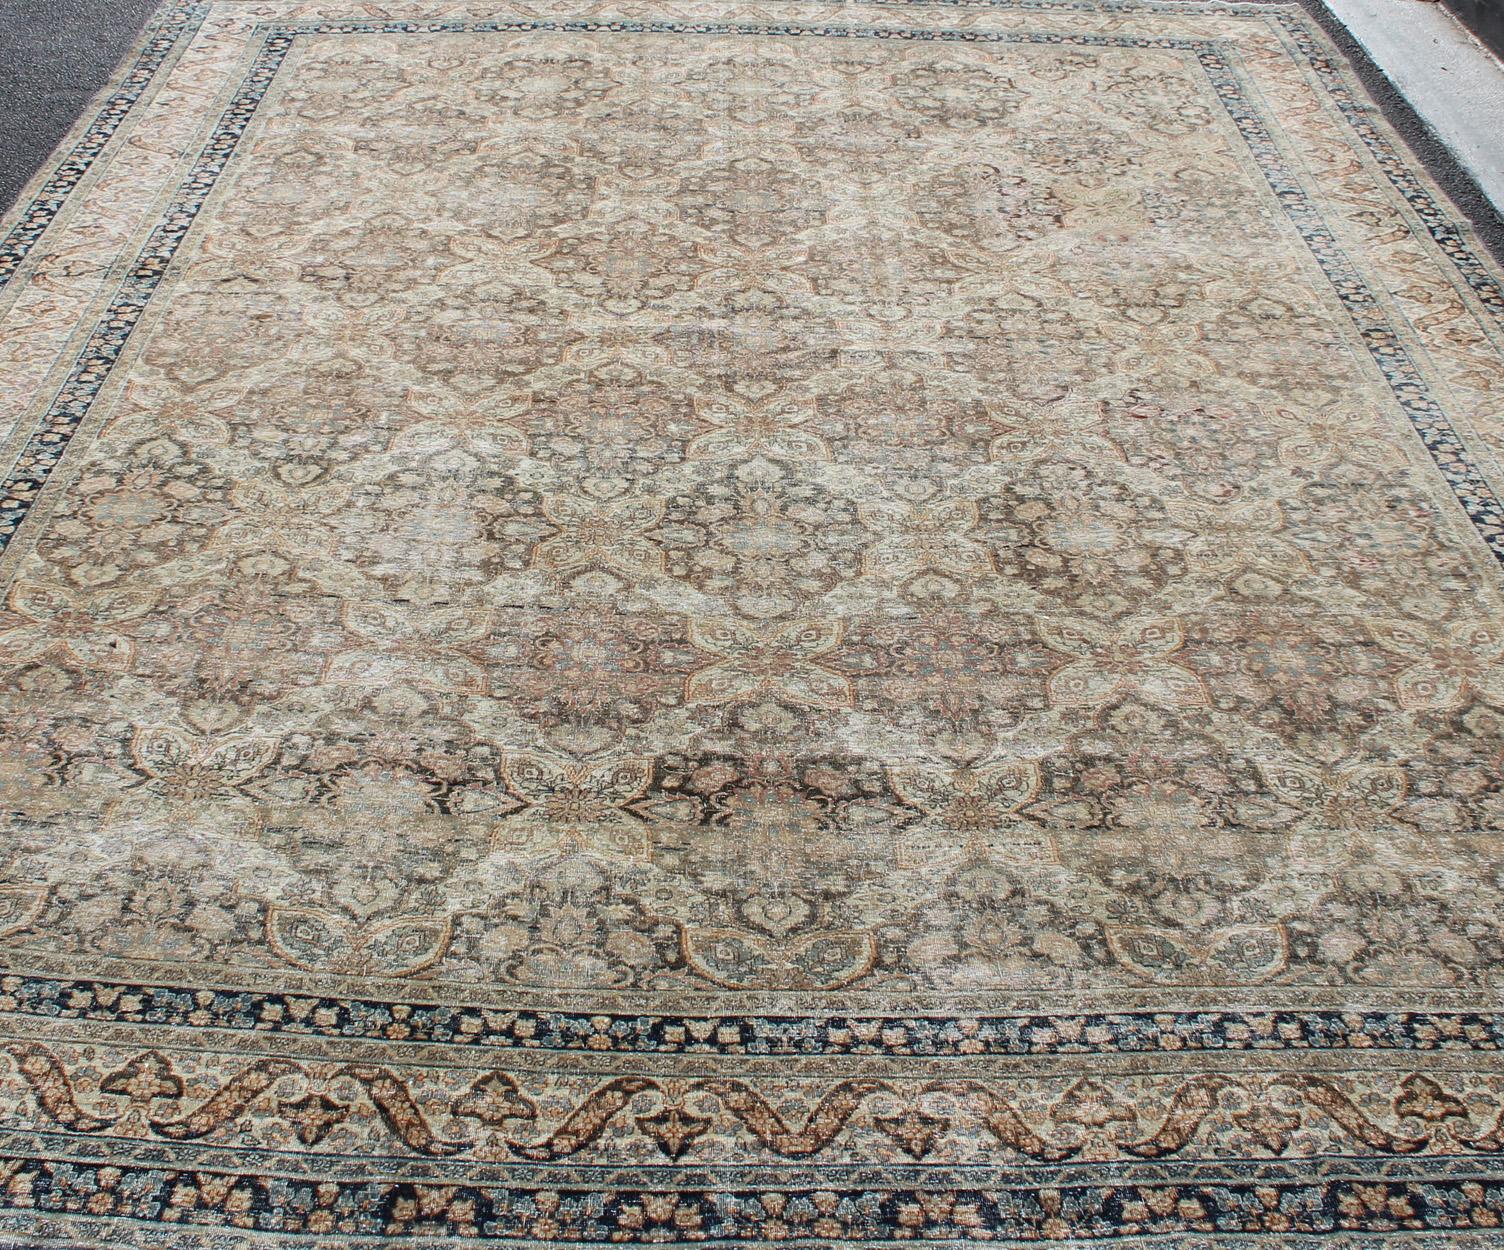 Wool Antique Persian Yzad Rug with All-Over Pattern with Elegant Medallions